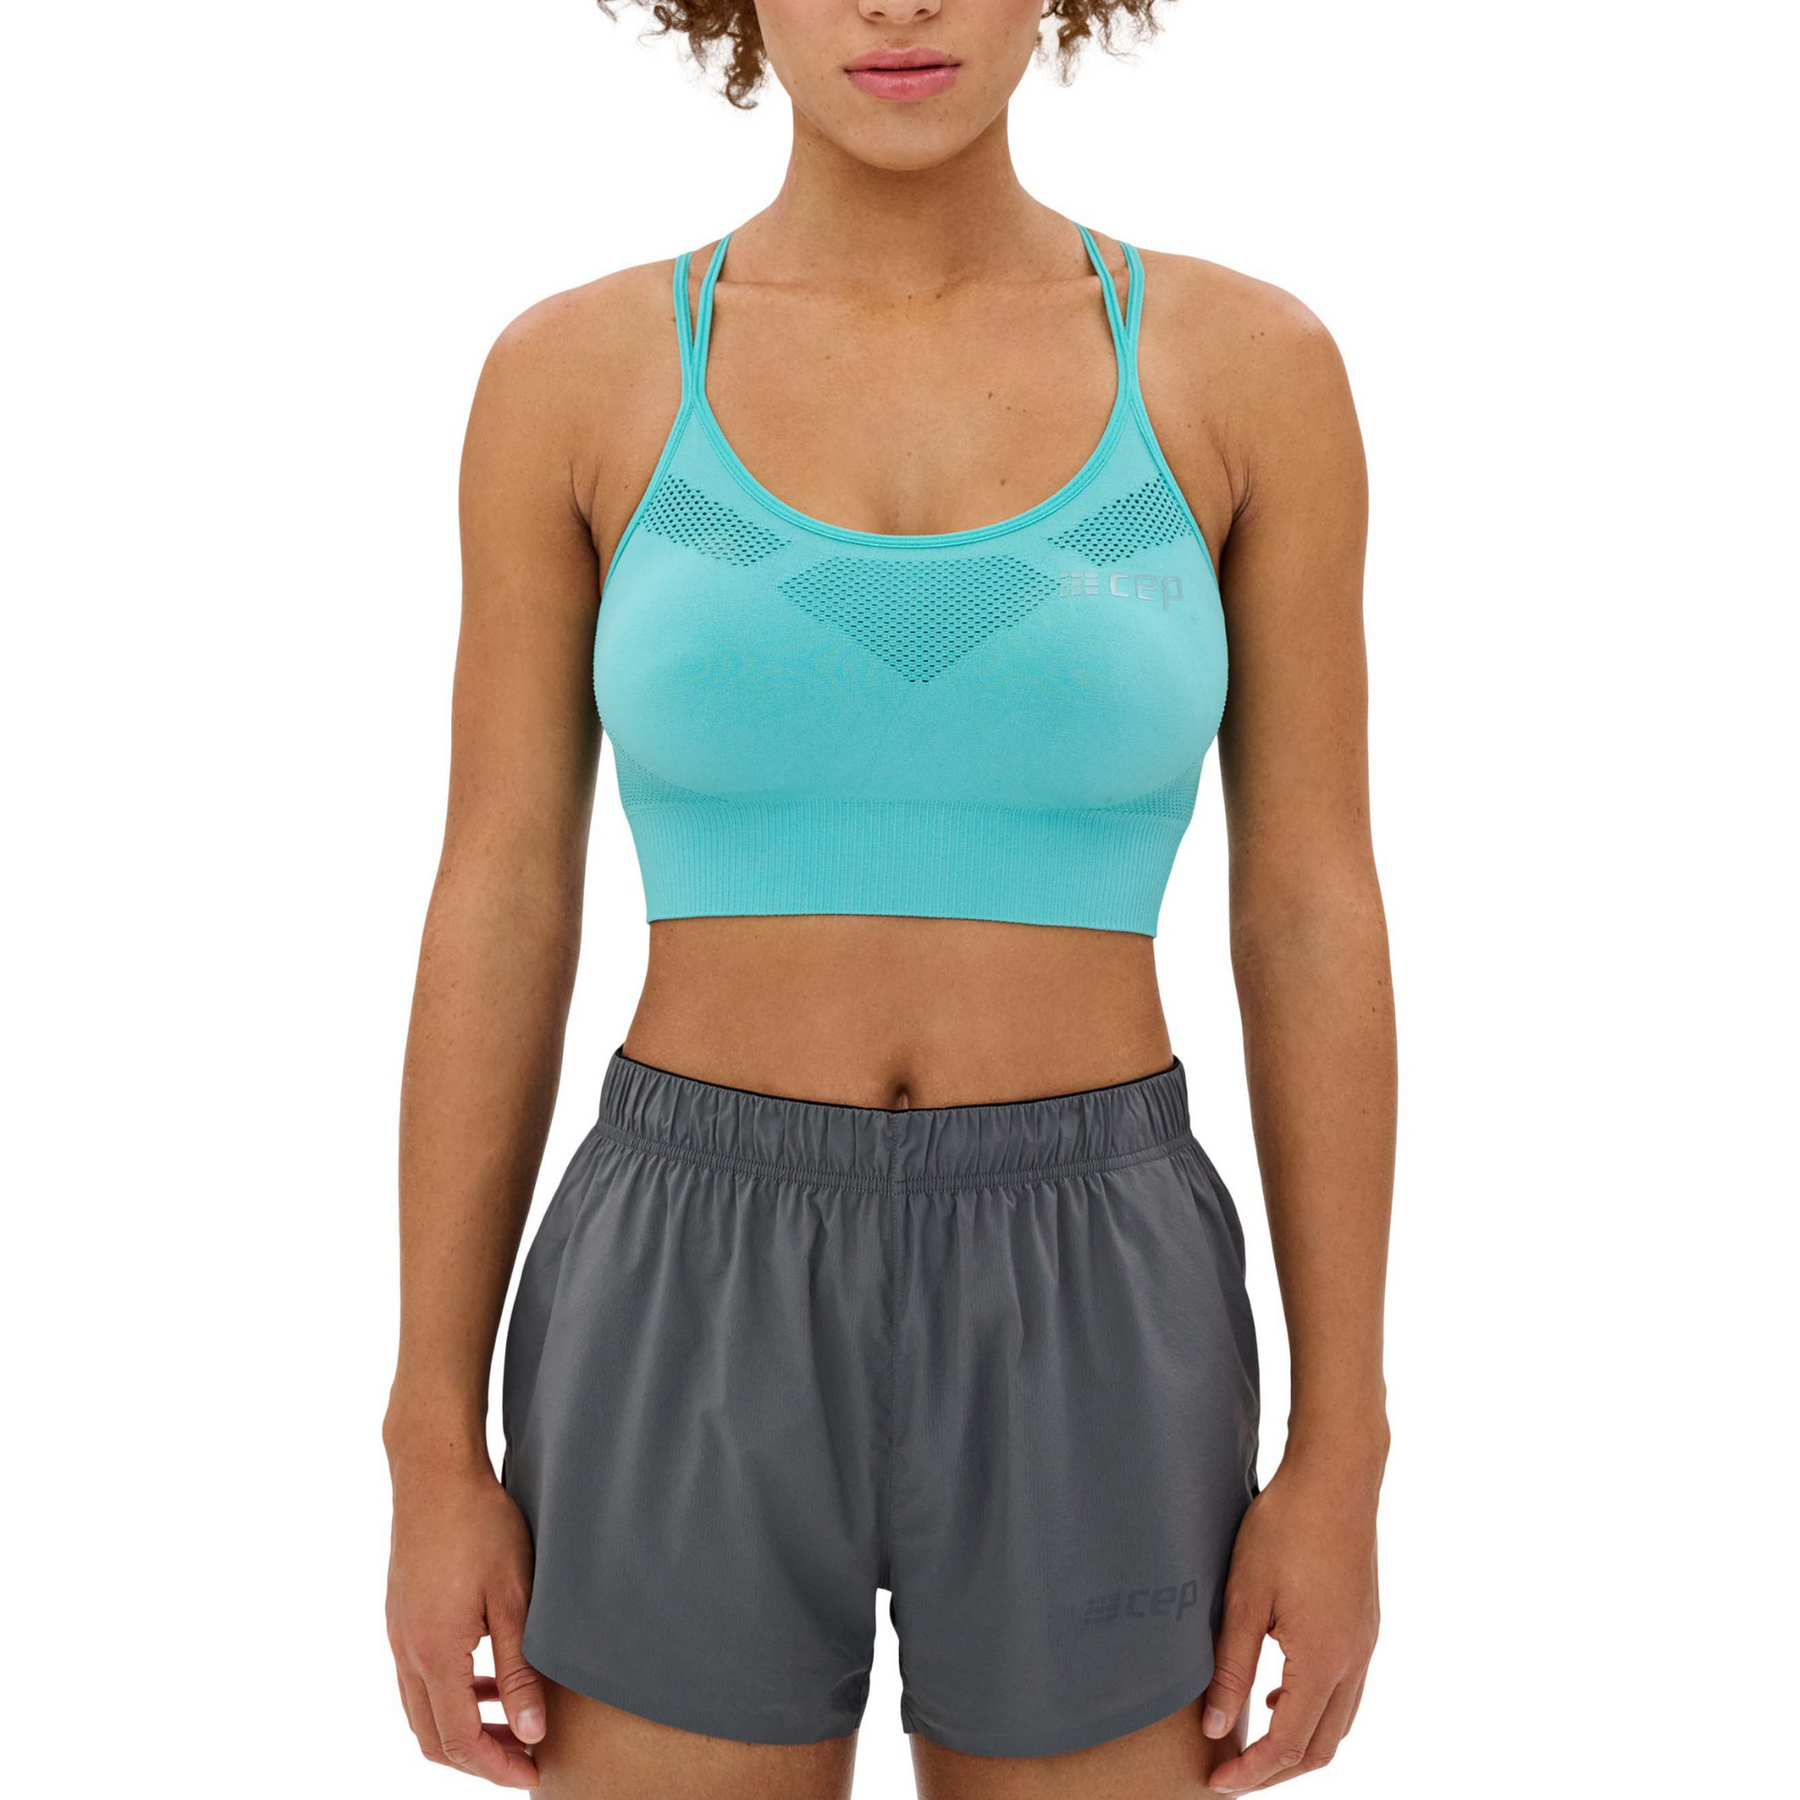 Trinity Sports Bra Turquoise, Seamless fabric Elastic fabric for optimal  freedom of movement Firm ribbed supportband Removable padding Medium  support Racer back